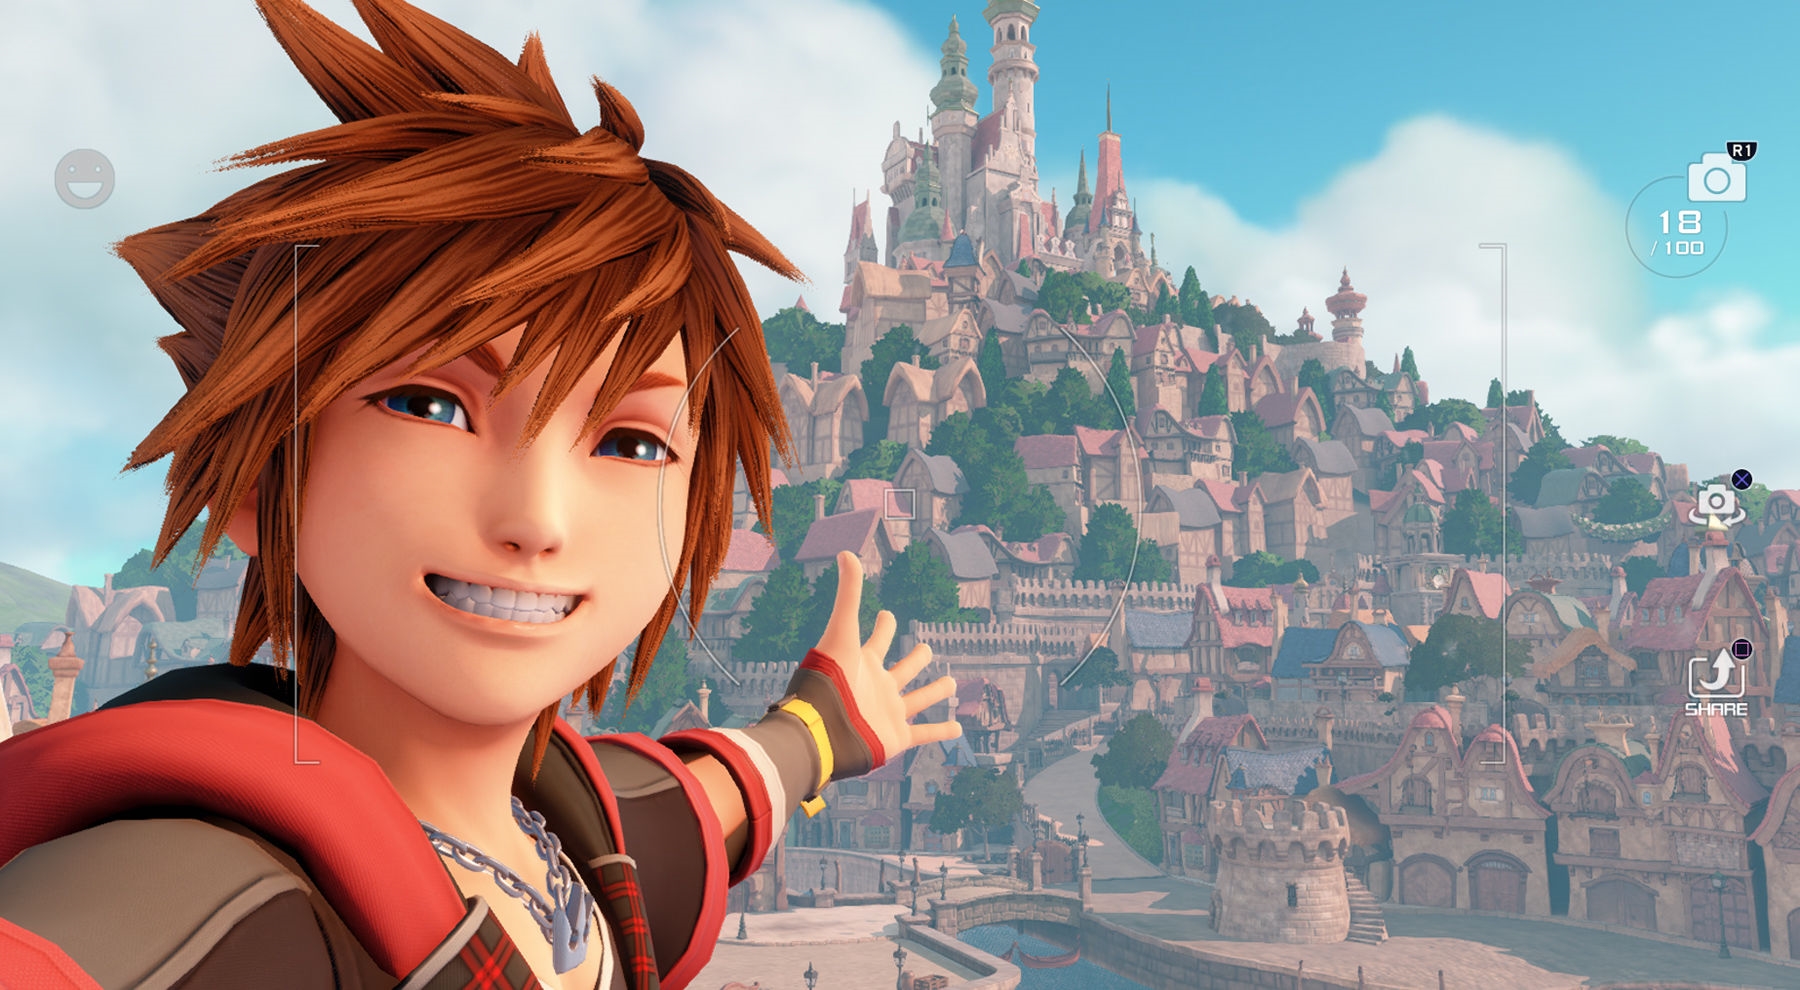 Sora is all about the gram in 'Kingdom Hearts 3' | DeviceDaily.com